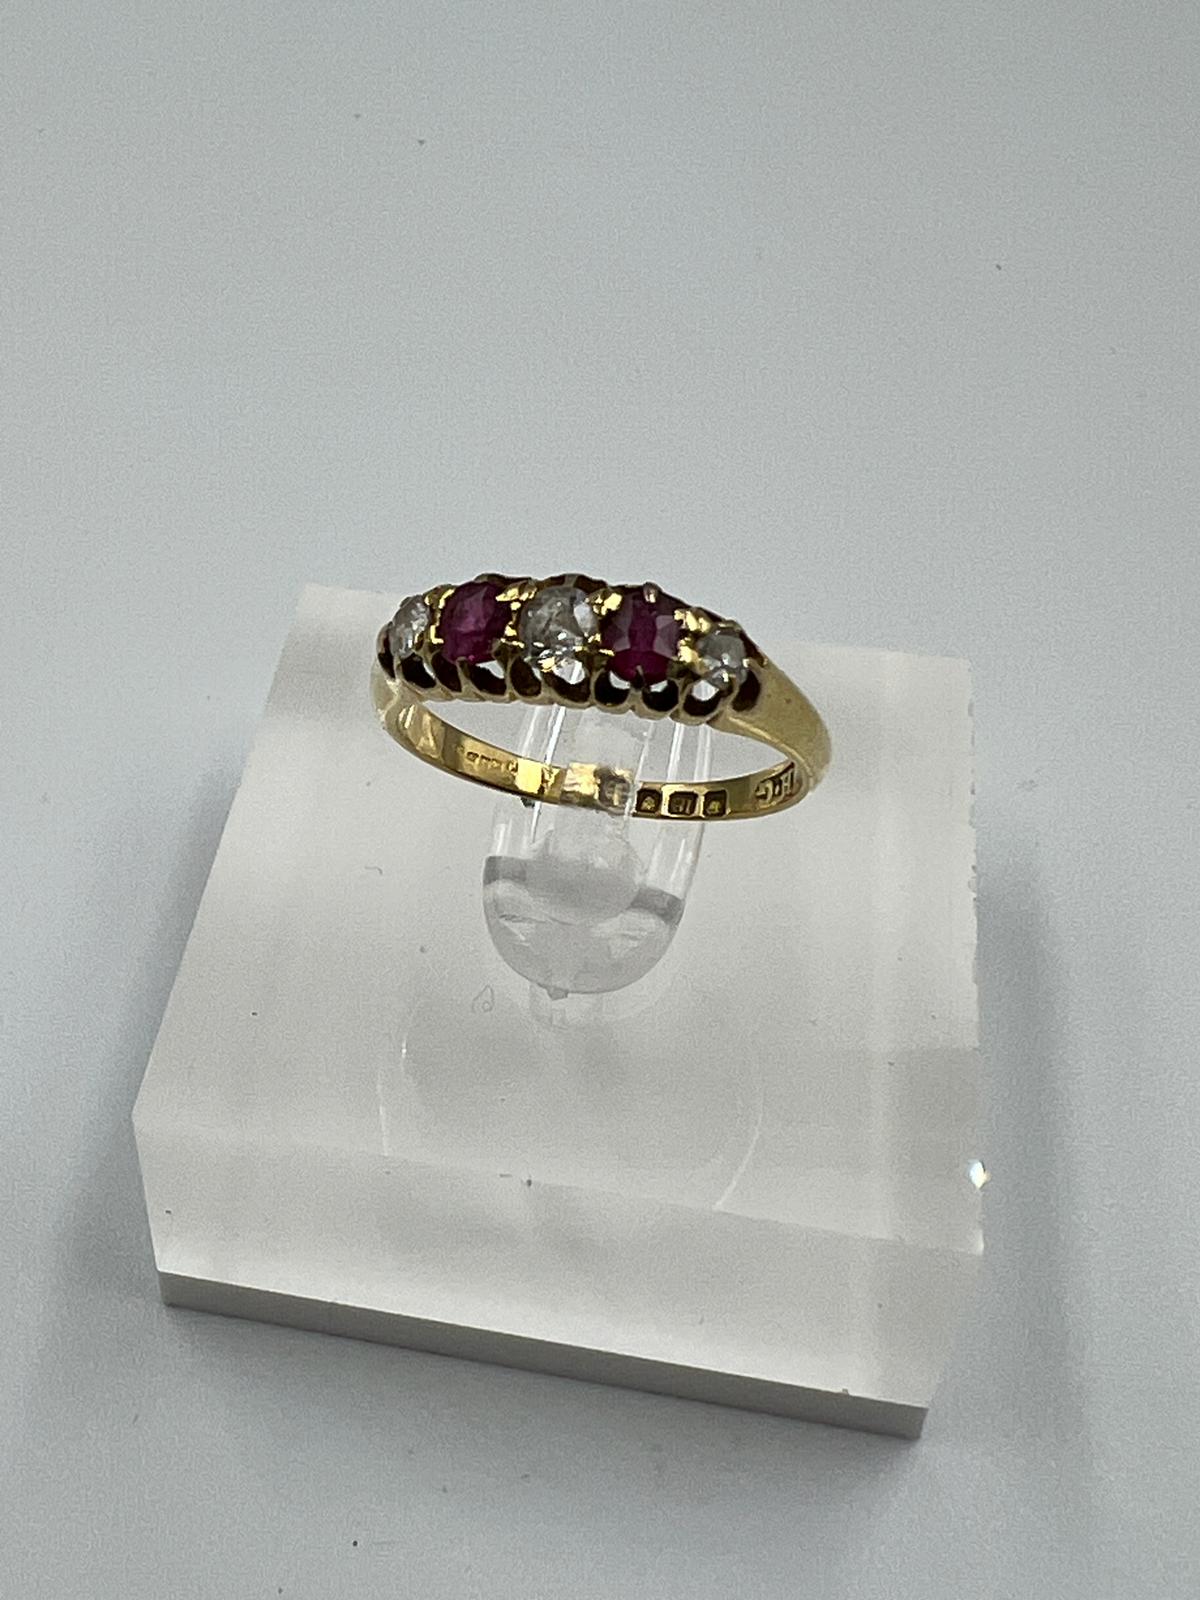 An 18ct yellow gold diamond and ruby ring, approximate size M